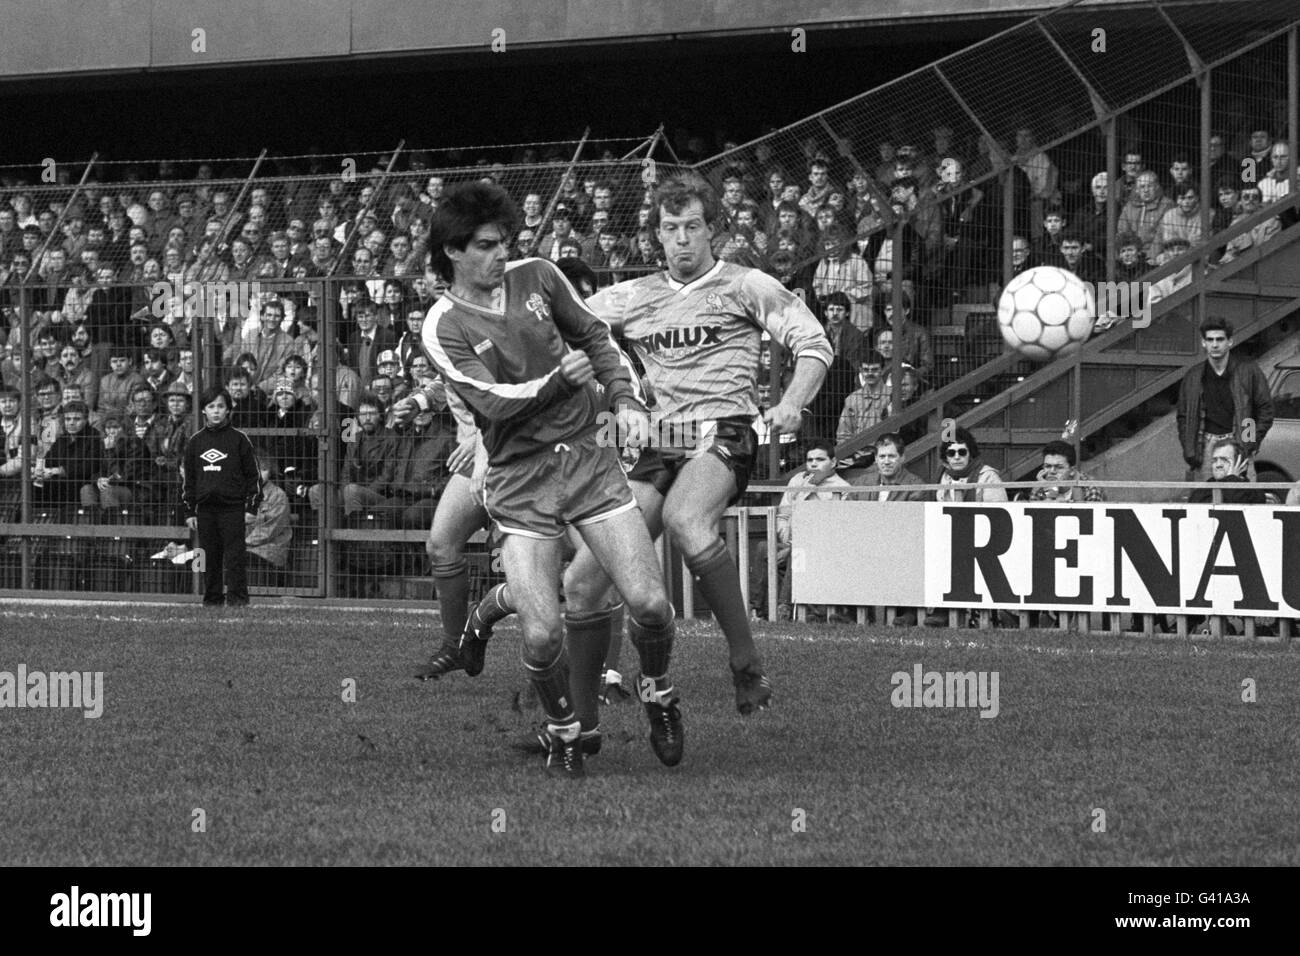 Soccer - Today League Division One - Chelsea v Sheffield Wednesday - Stamford Bridge. Chelsea's Steve Clarke (l) clears the ball under pressure from Sheffield Wednesday's Gary Megson (r). Stock Photo